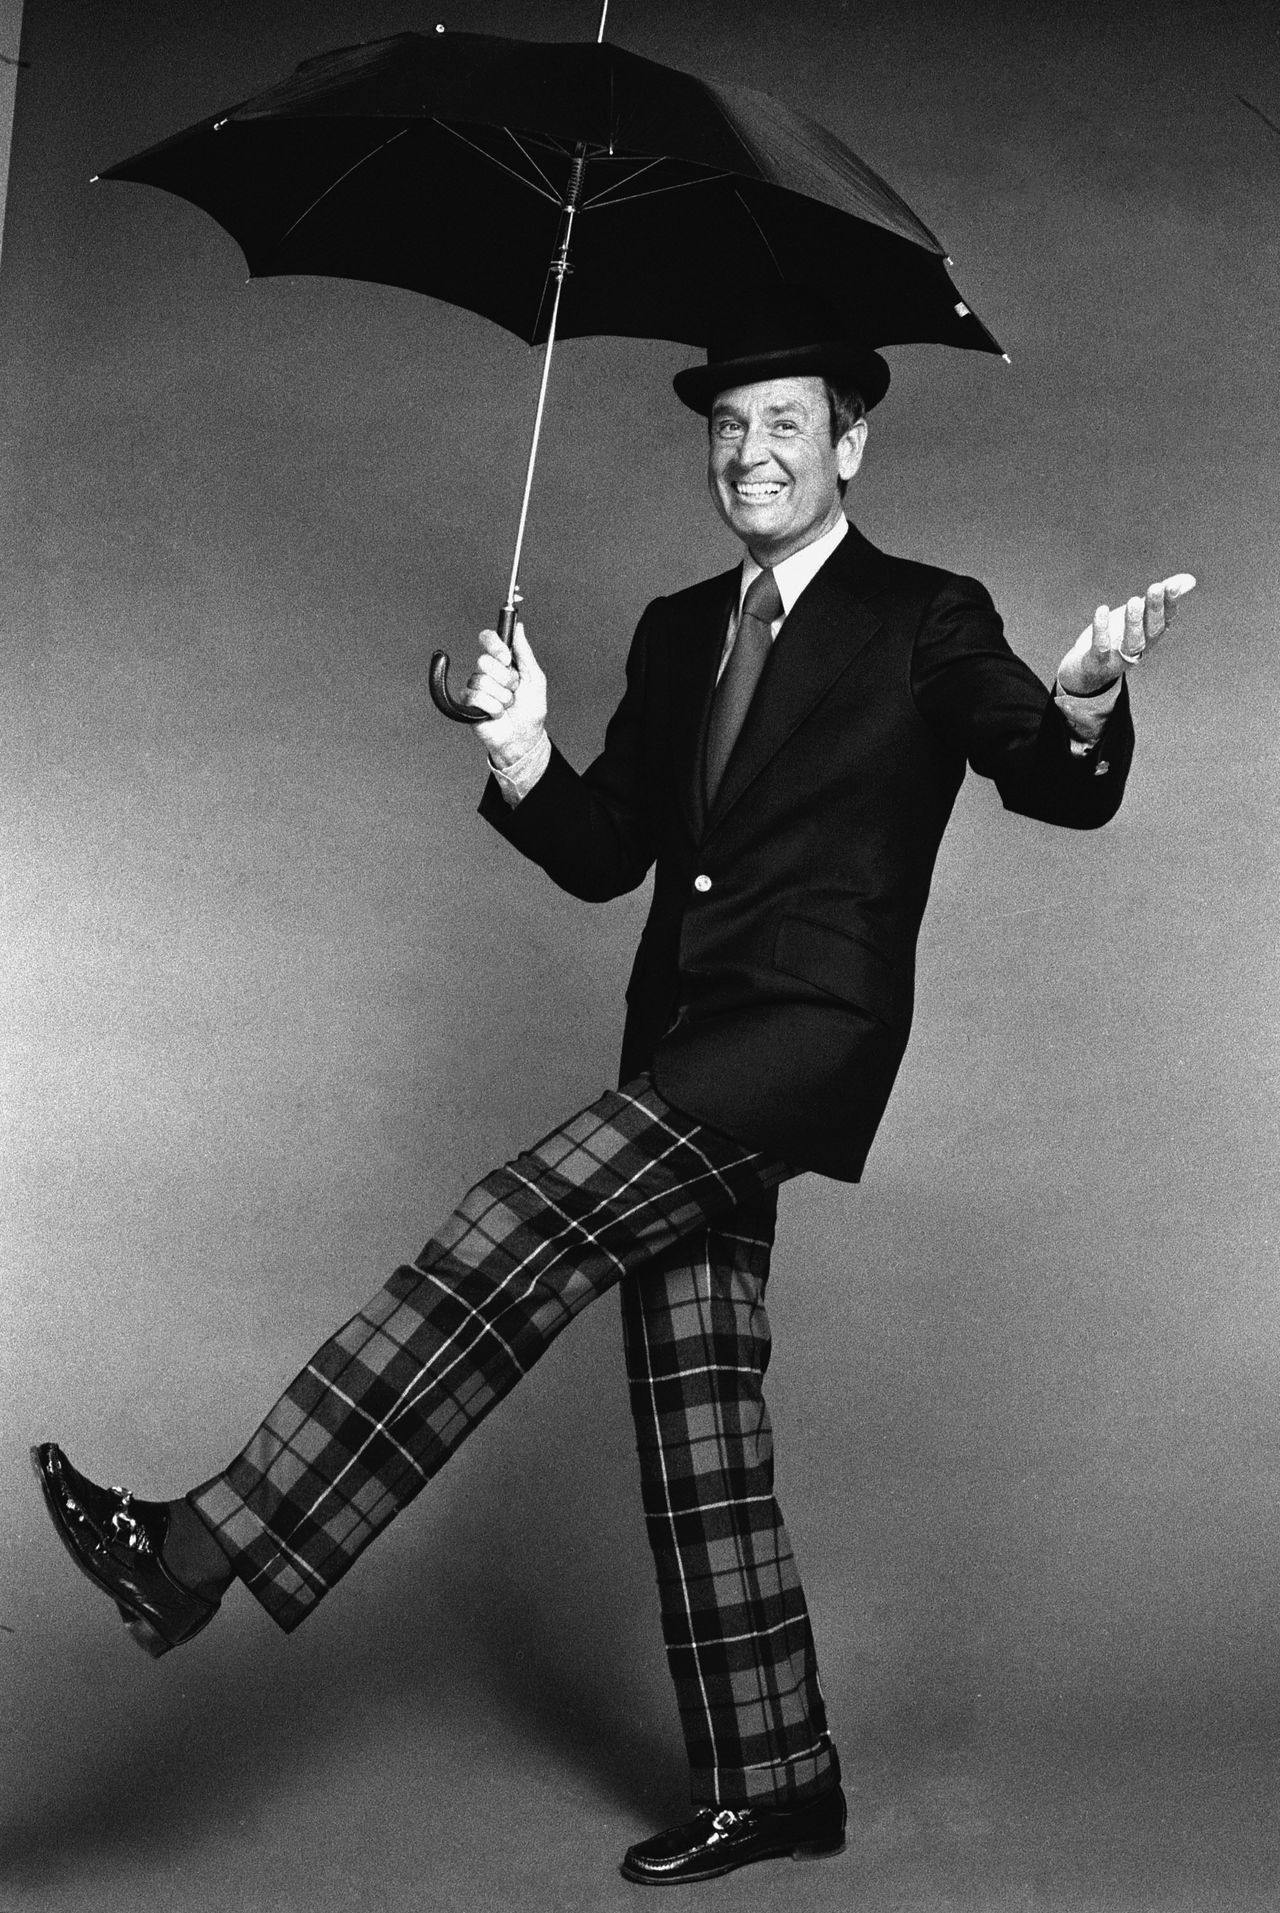 Barker wears a bowler hat and plaid pants as he cavorts with an umbrella on Dec. 6, 1973.